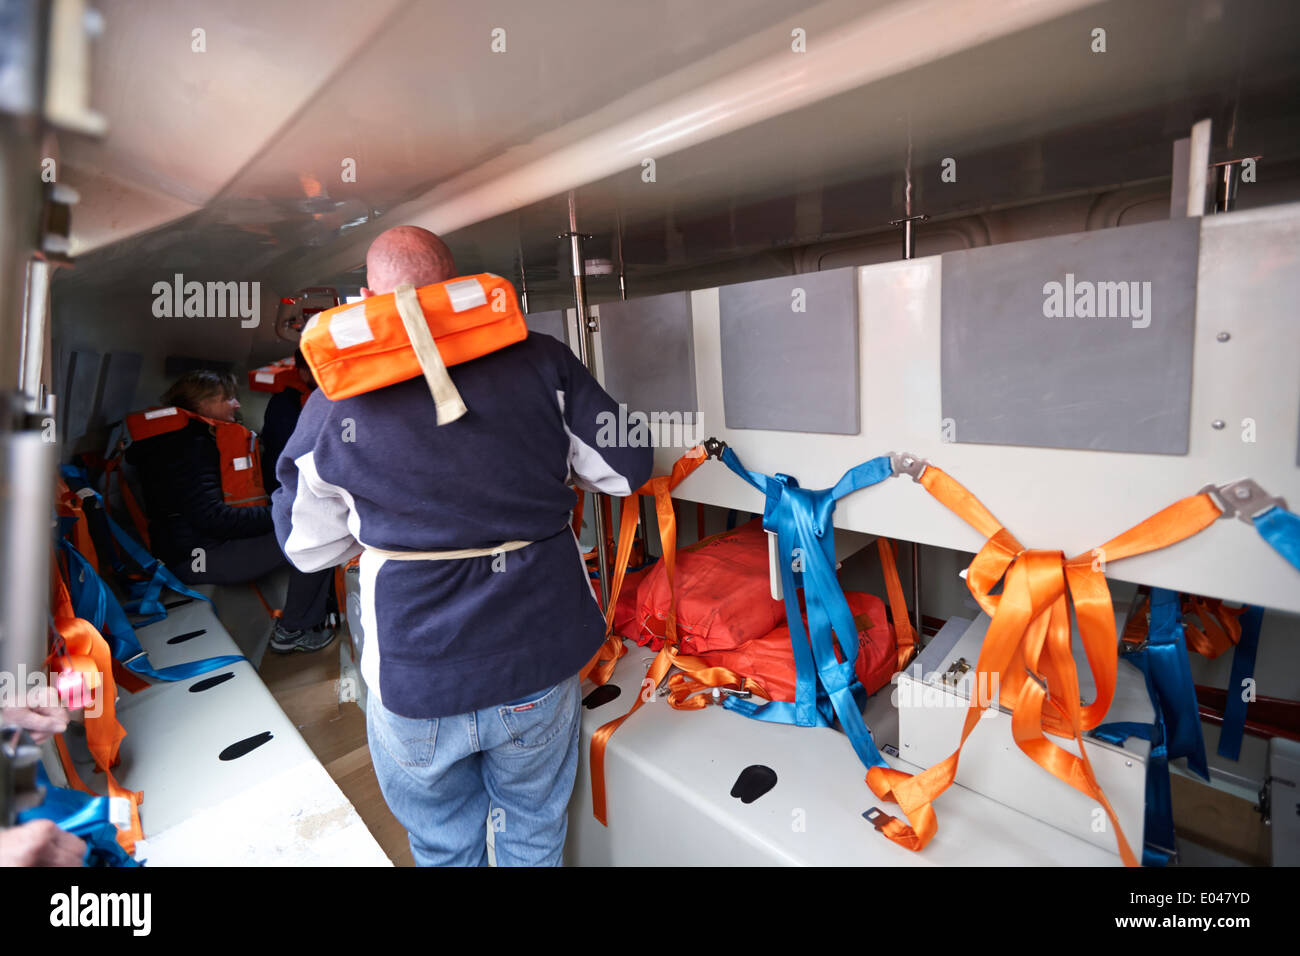 tourists during lifeboat drill in interior of an emergency lifeboat on board a cruise ship Stock Photo